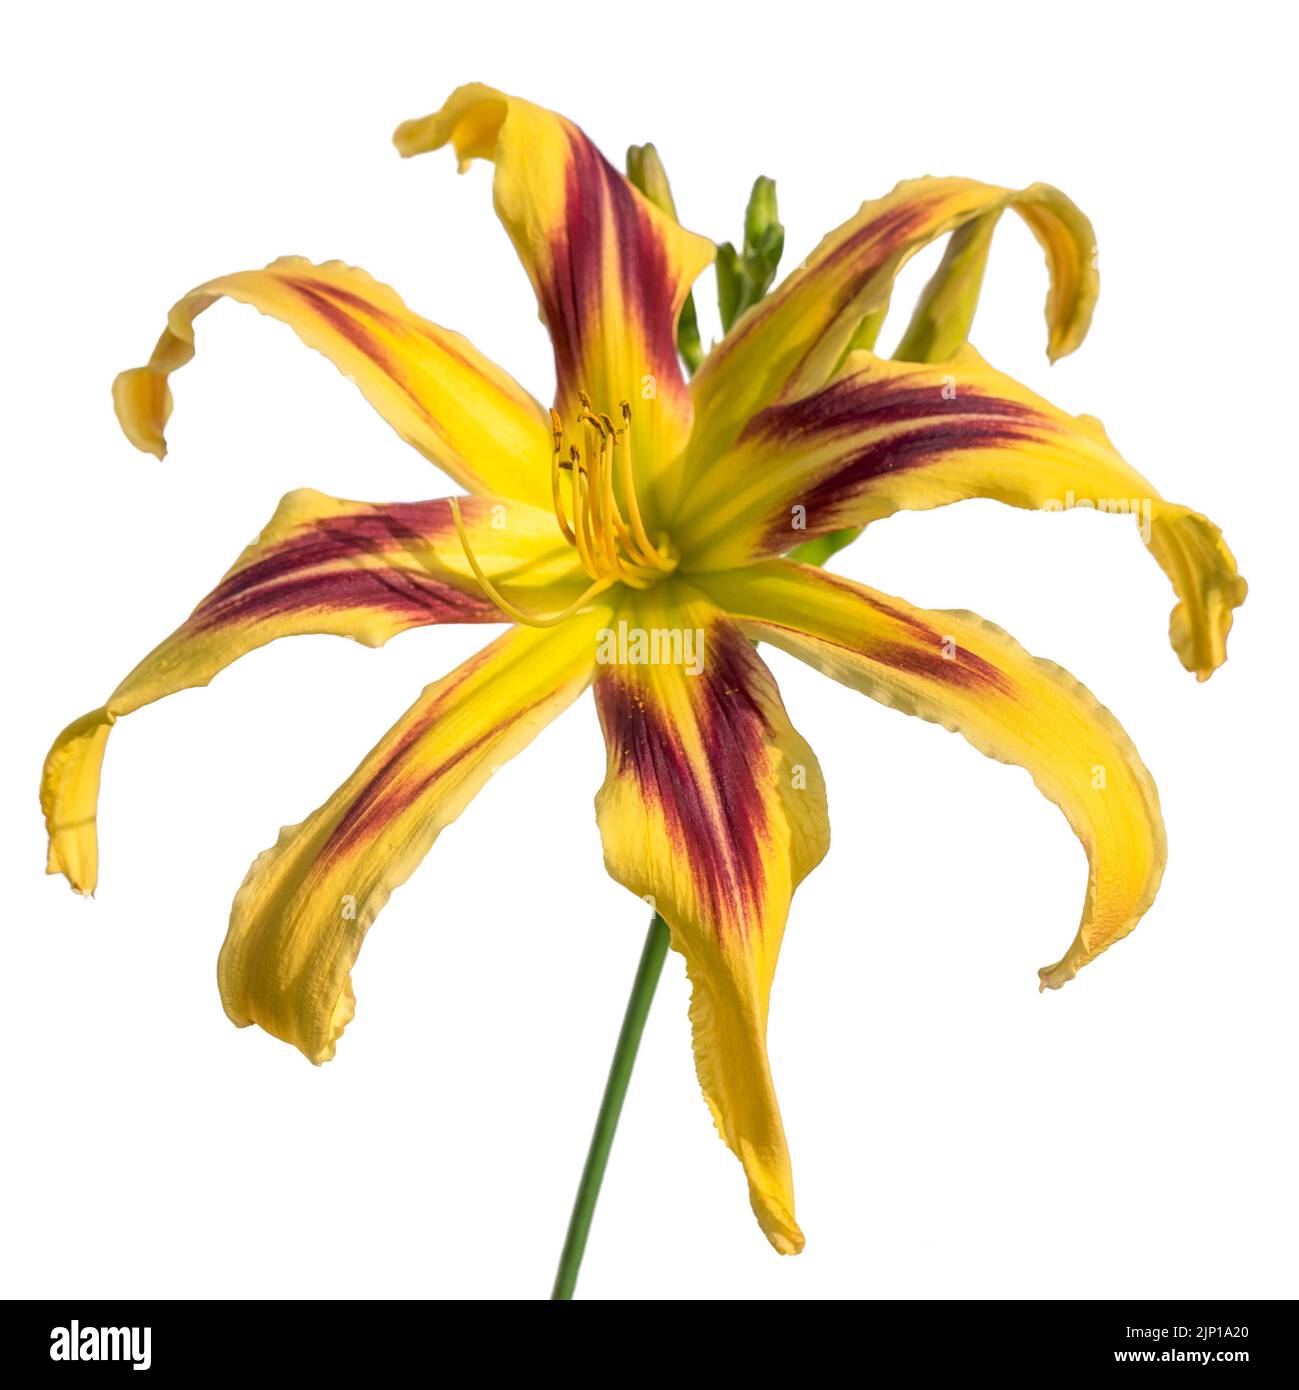 Spider daylily flower with eight petals close up isolated on white Stock Photo